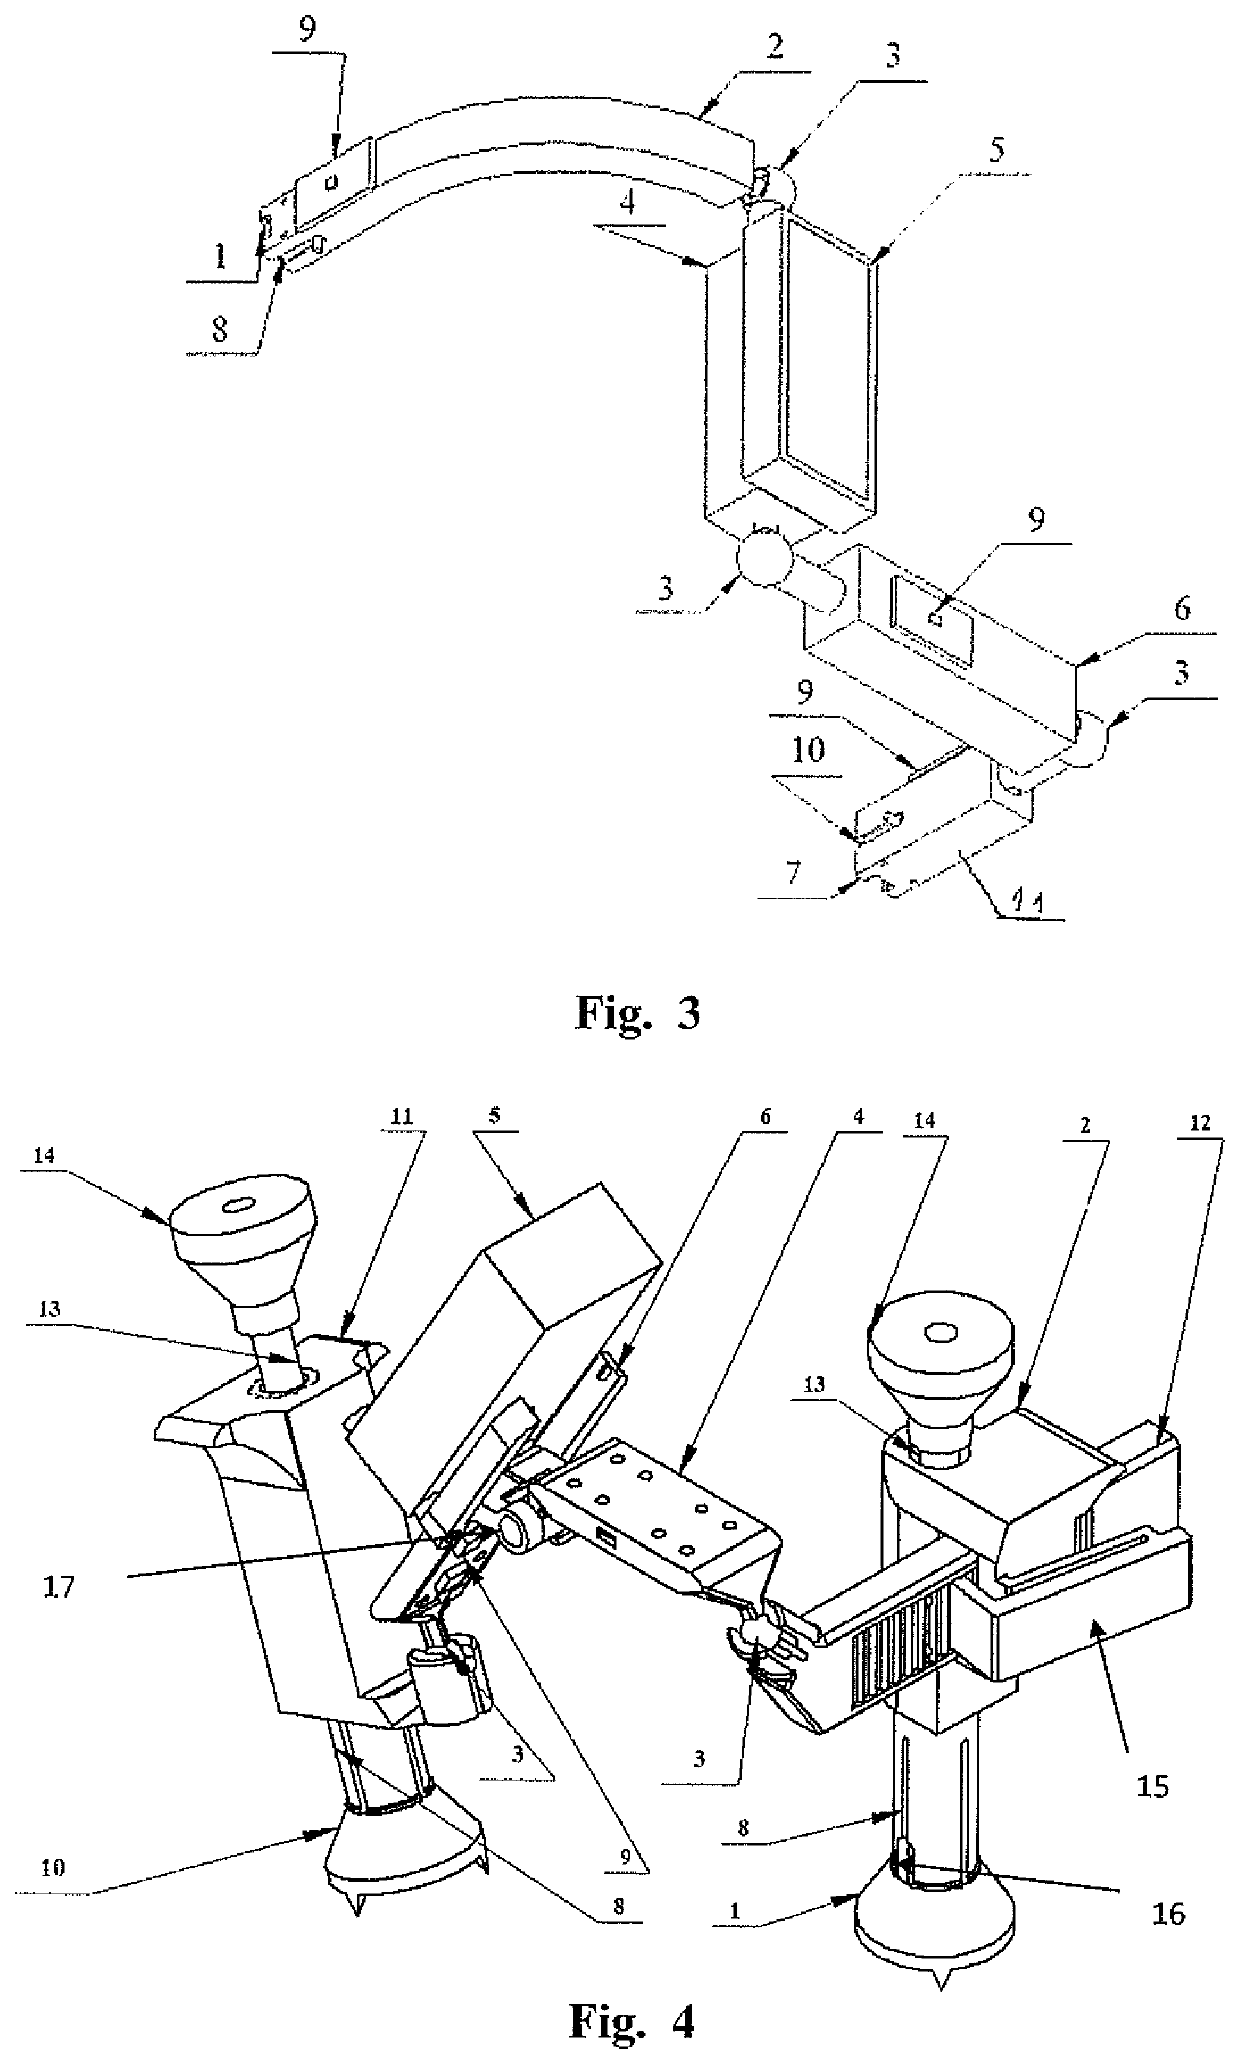 Device for measuring femur displacement and method of making orthopedic measurements during a surgical procedure to correct a damaged hip